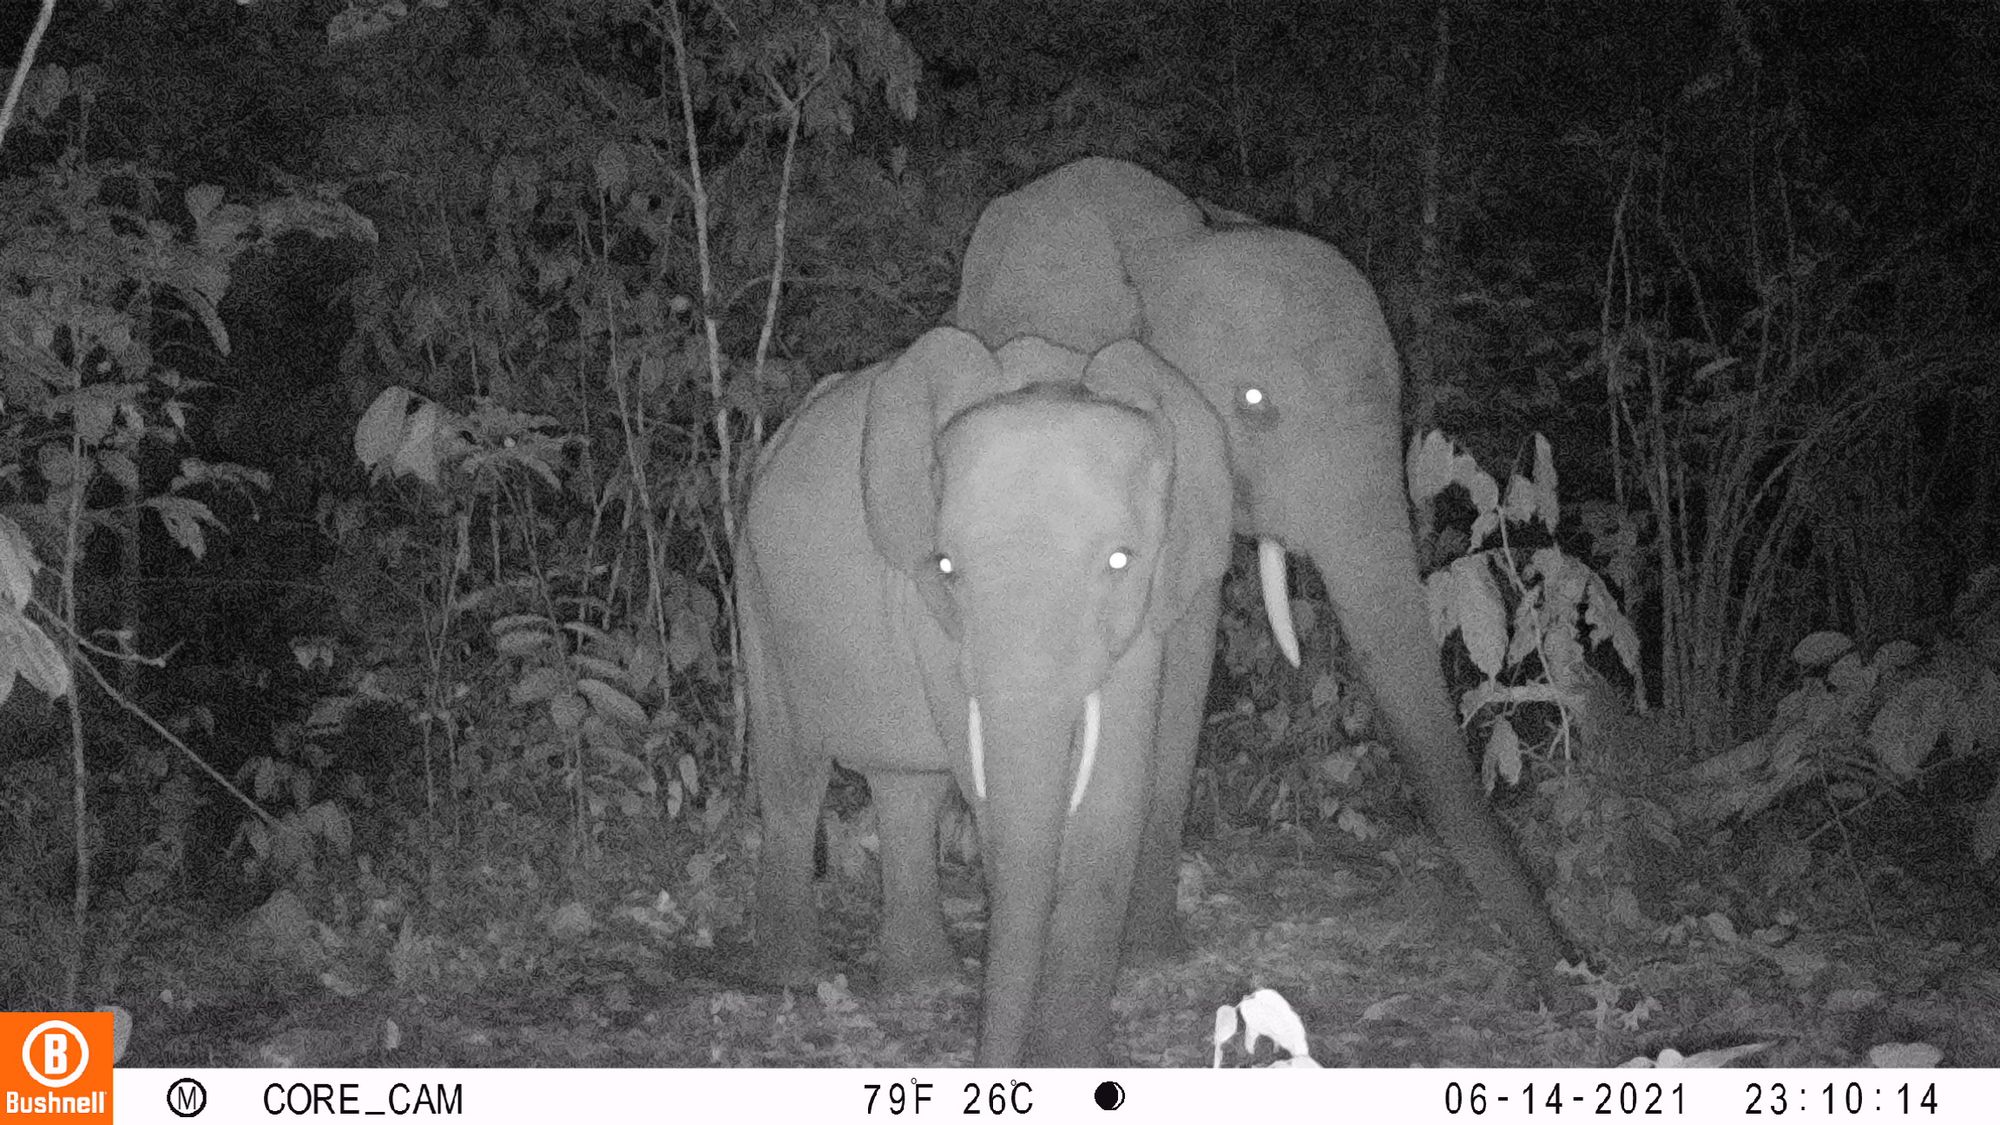 Camera trap image from the pilot in Gabon showing two elephants.